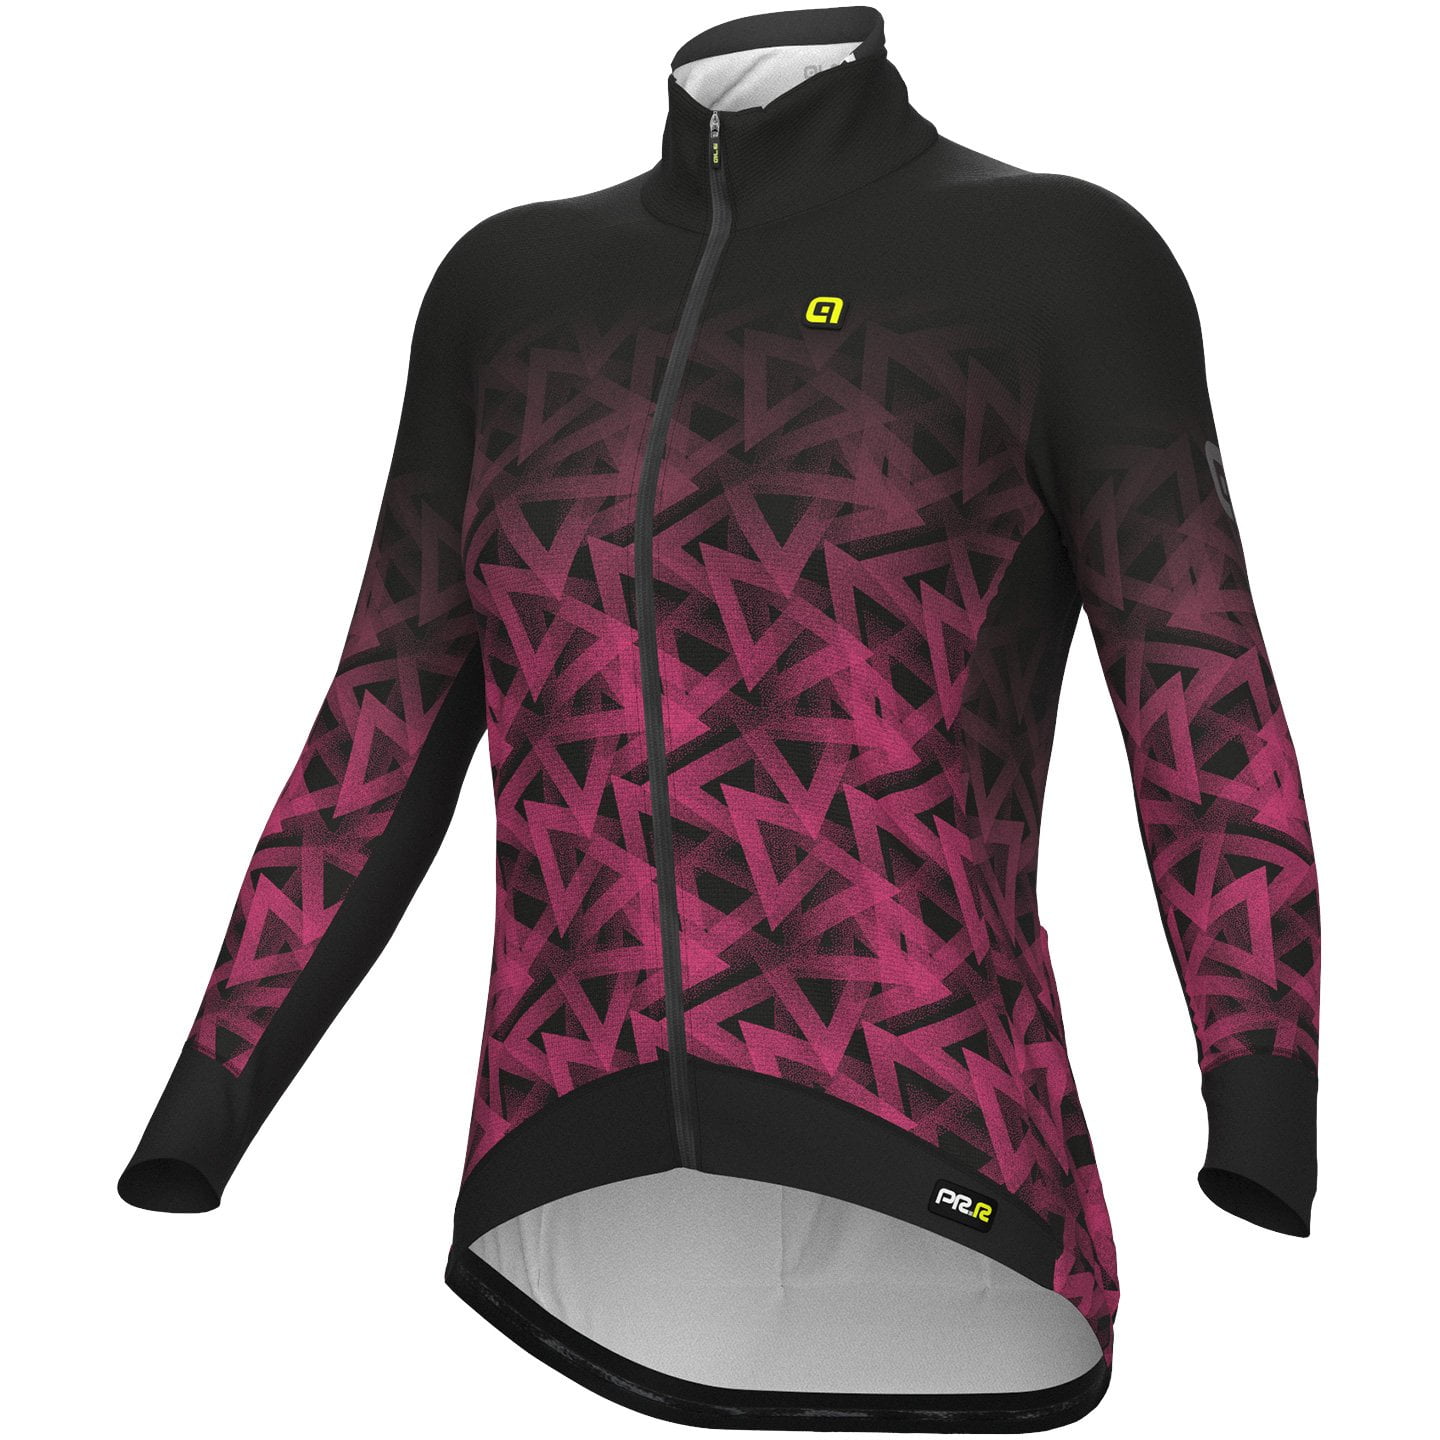 ALE Pyramid Women’s Winter Jacket Women’s Thermal Jacket, size M, Cycle jacket, Cycling clothing